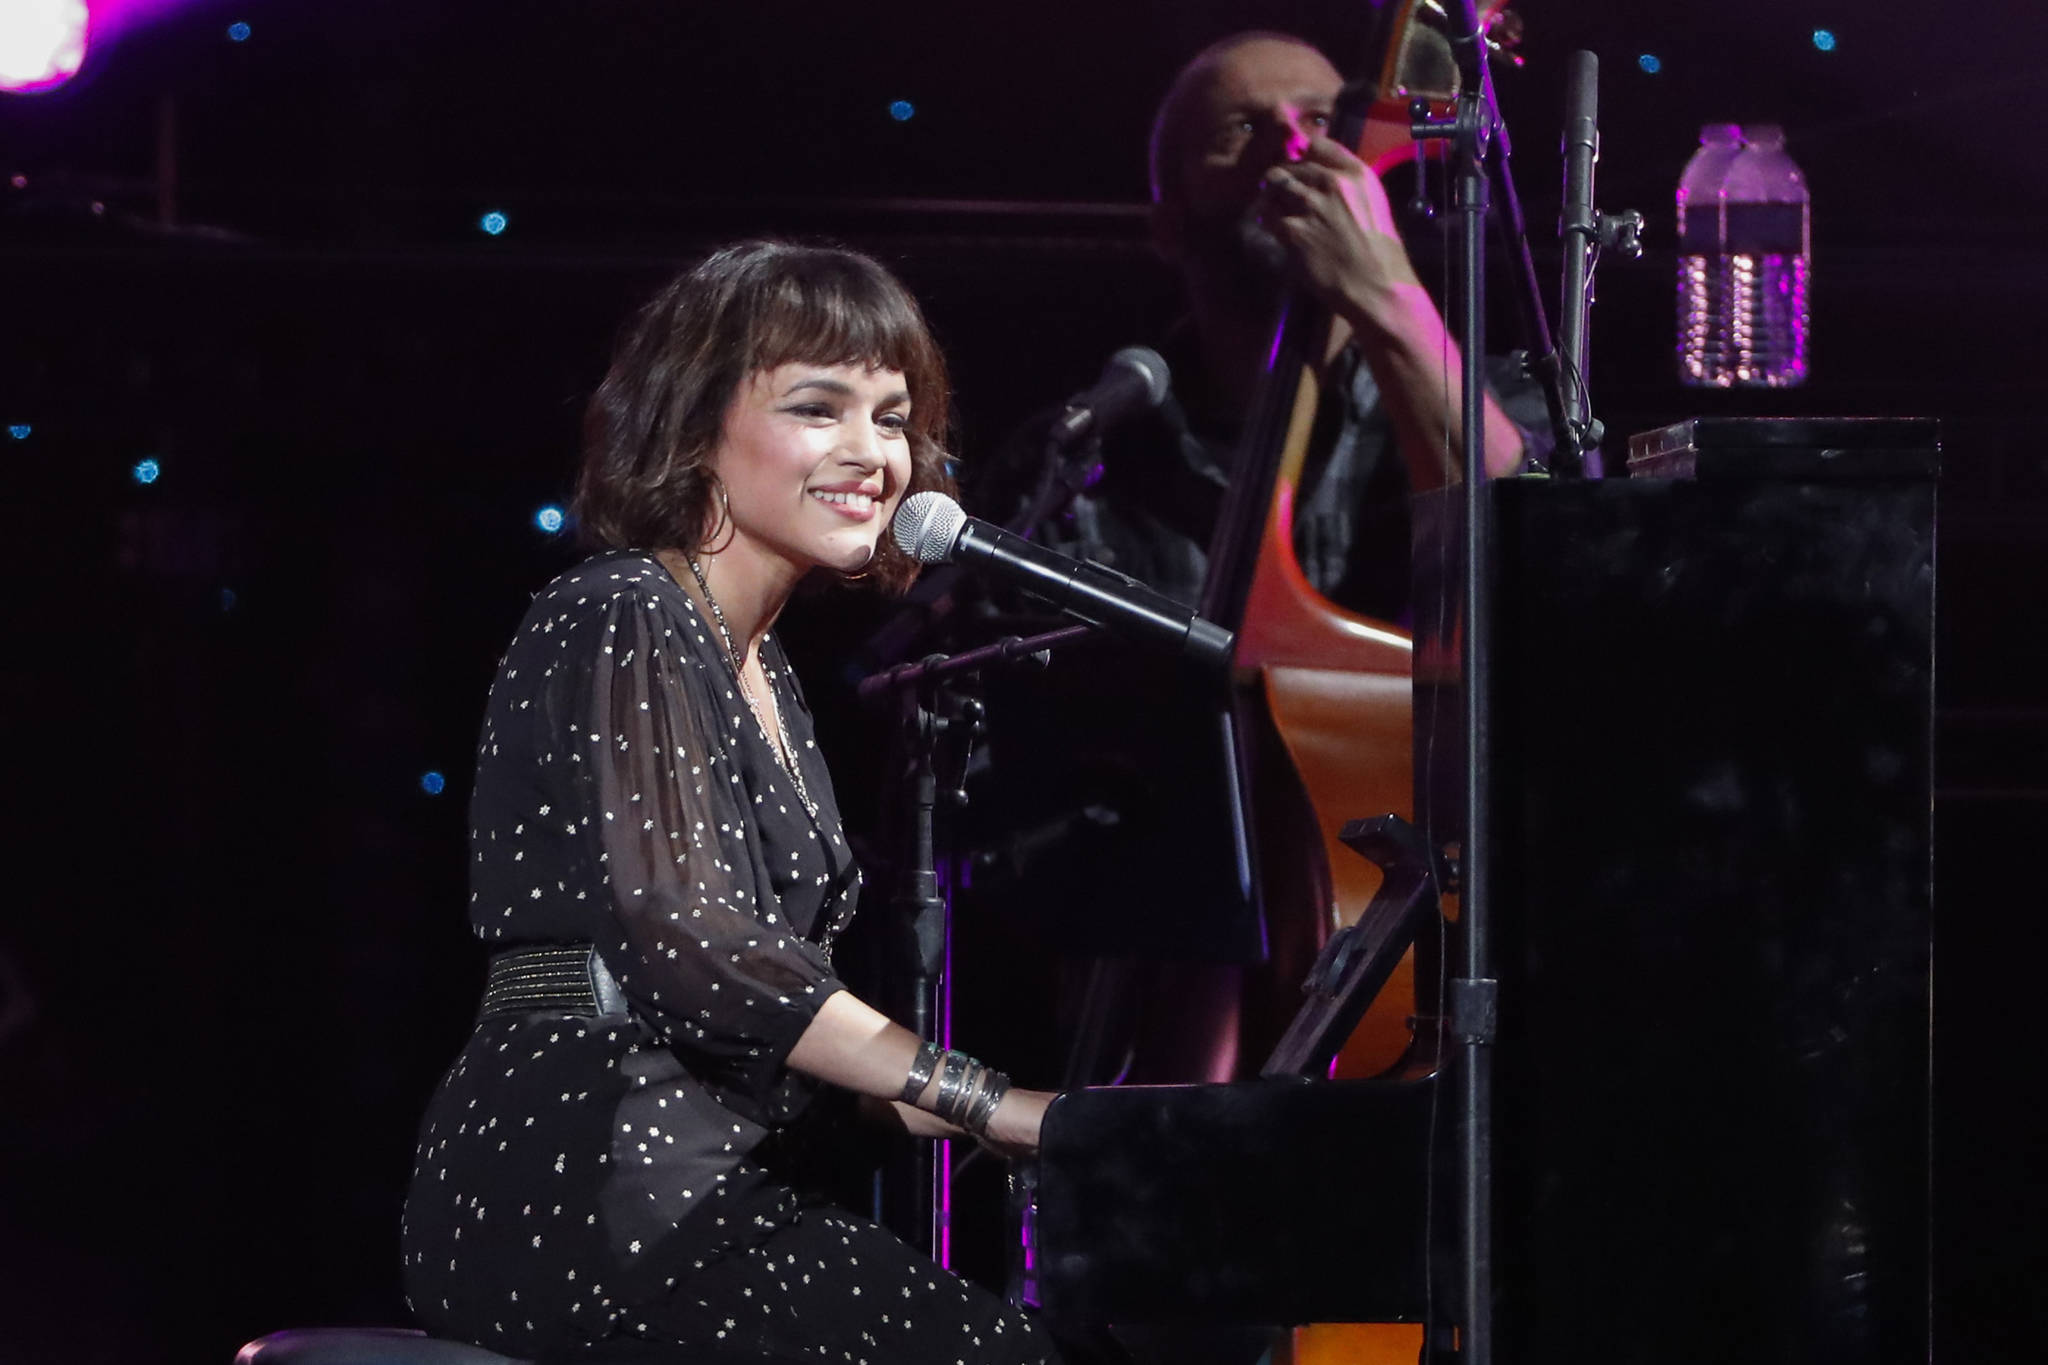 Norah Jones performs at Willie: Life & Songs Of An American Outlaw at Bridgestone Arena on Saturday, Jan. 12, 2019, in Nashville, Tennessee. (Al Wagner | Invision via Associated Press)